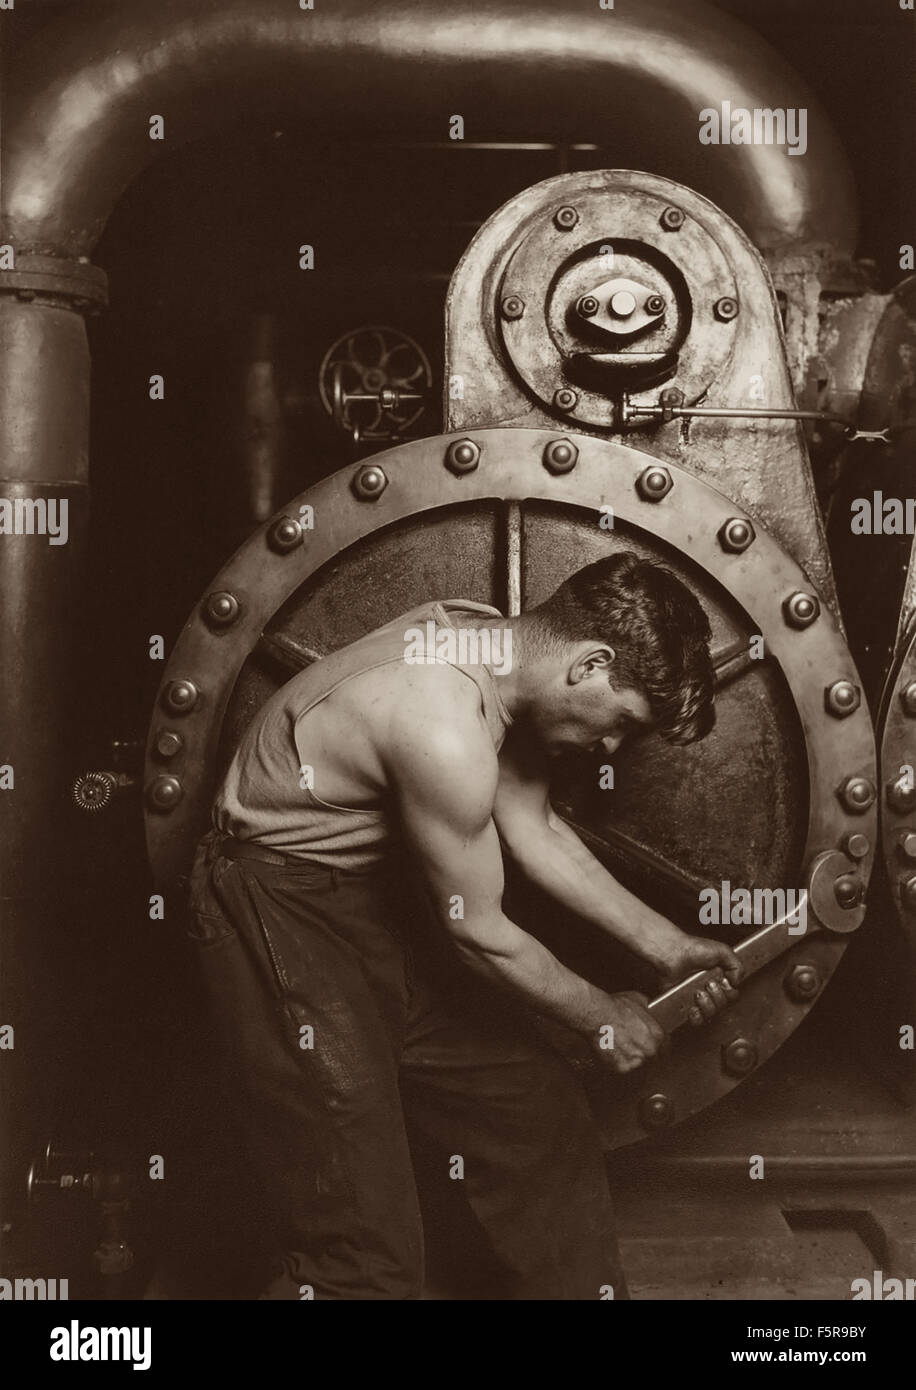 1920 photograph by Lewis Wickes Hine (American, 1874-1940) called Power House Mechanic. Stock Photo